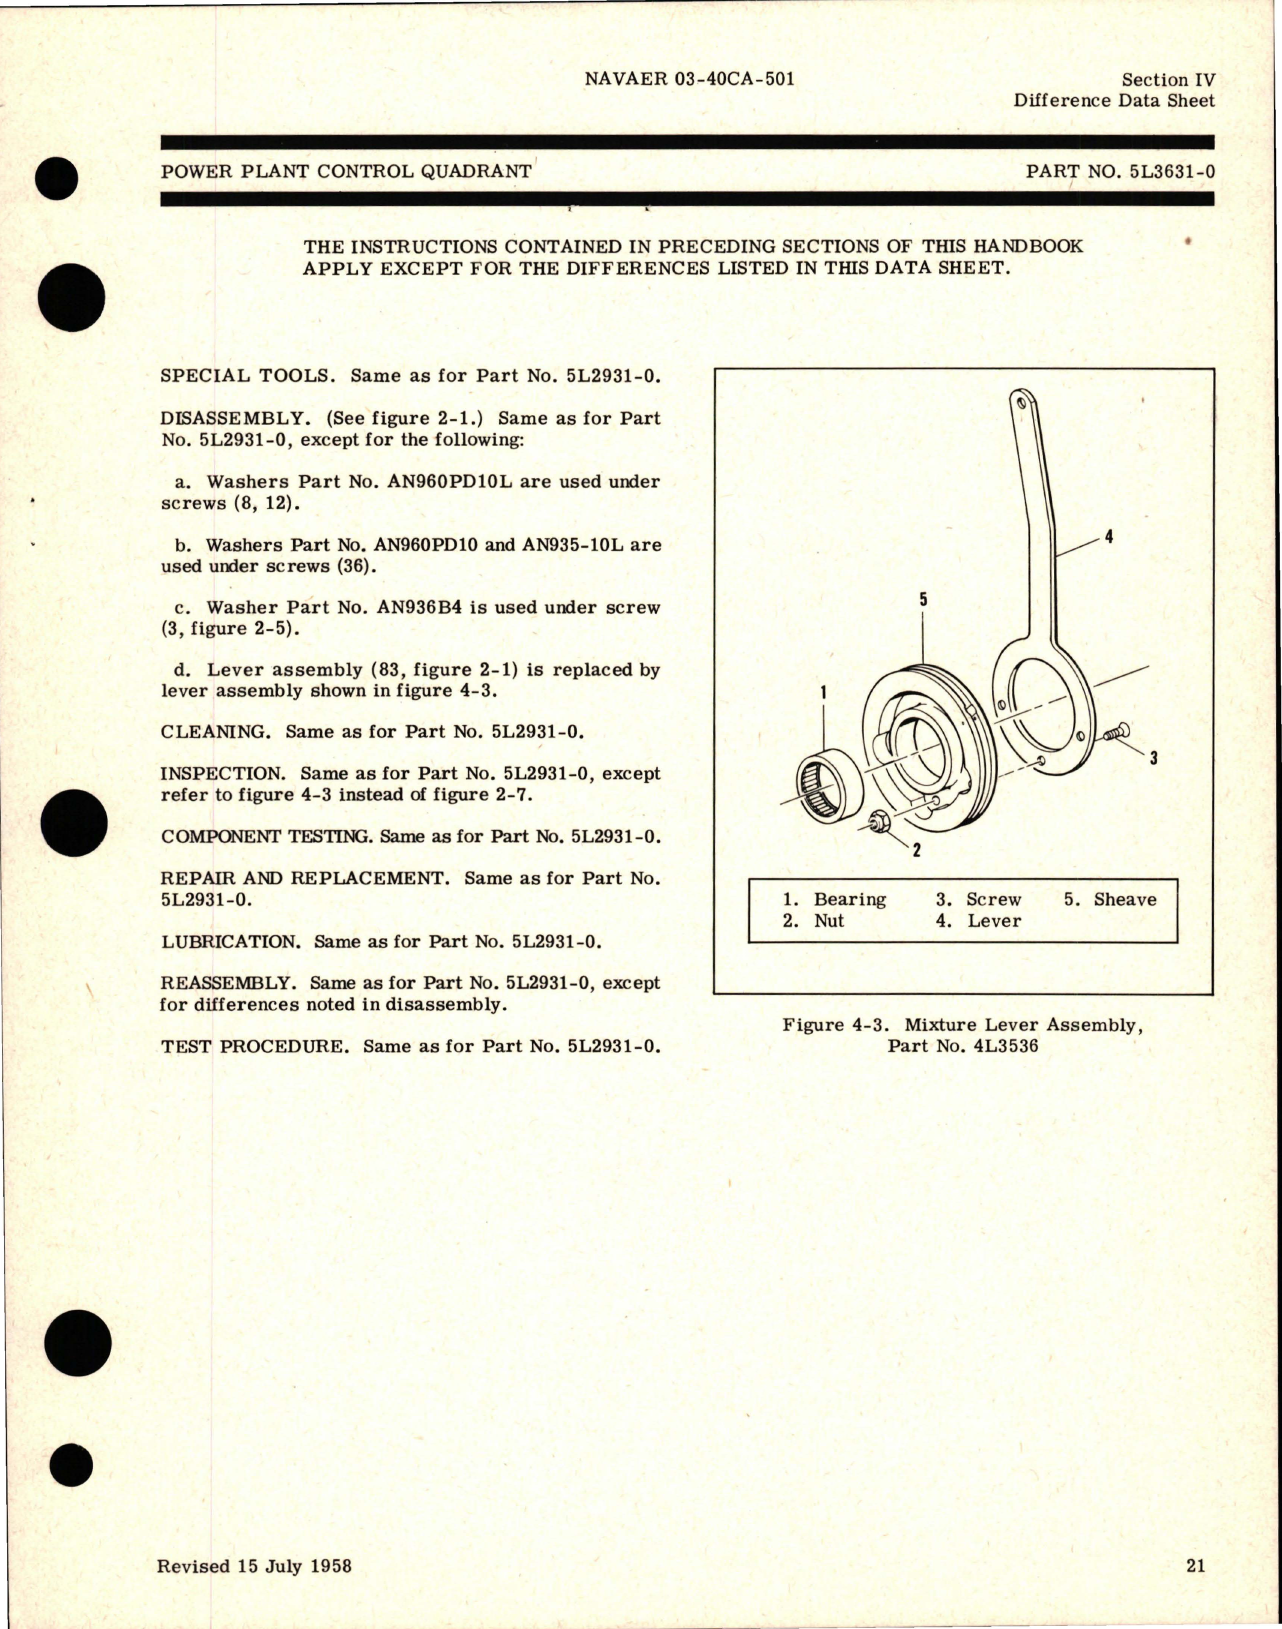 Sample page 5 from AirCorps Library document: Overhaul Instructions for Power Plant Control Quadrant - Parts 5L2931-0, 5L2931-1, 5L2931-2, 5L2931-3, 5L3631-0, 5L3631-1, 5L3631-2, and 5L3631-3